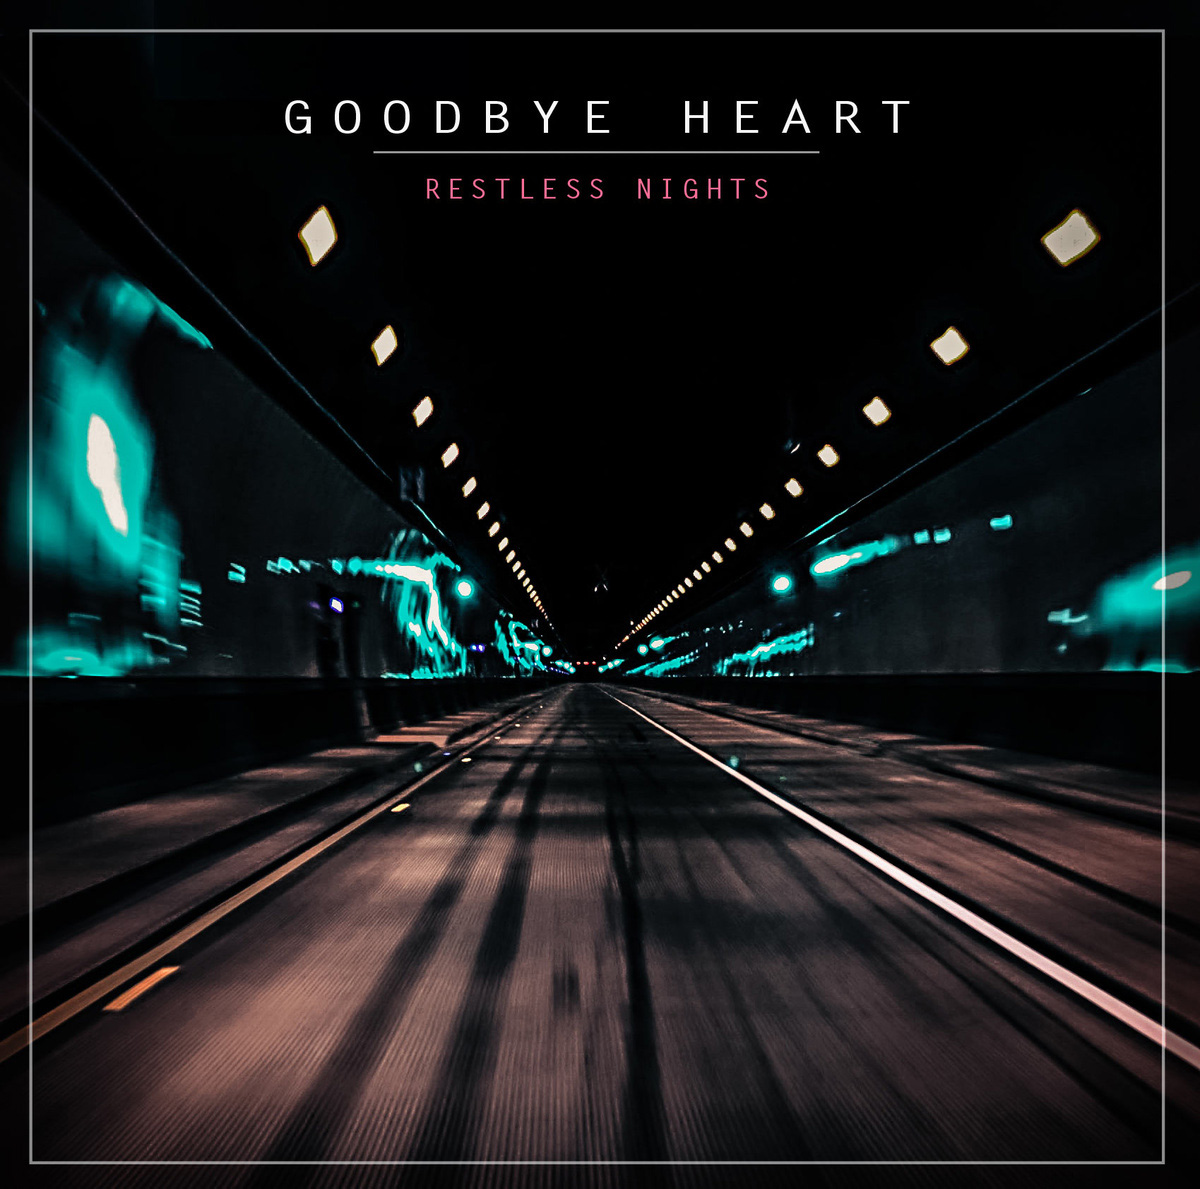 Goodbye Heart, Restless Nights (out now, self-released, goodbyeheartband.com) It’s been only a